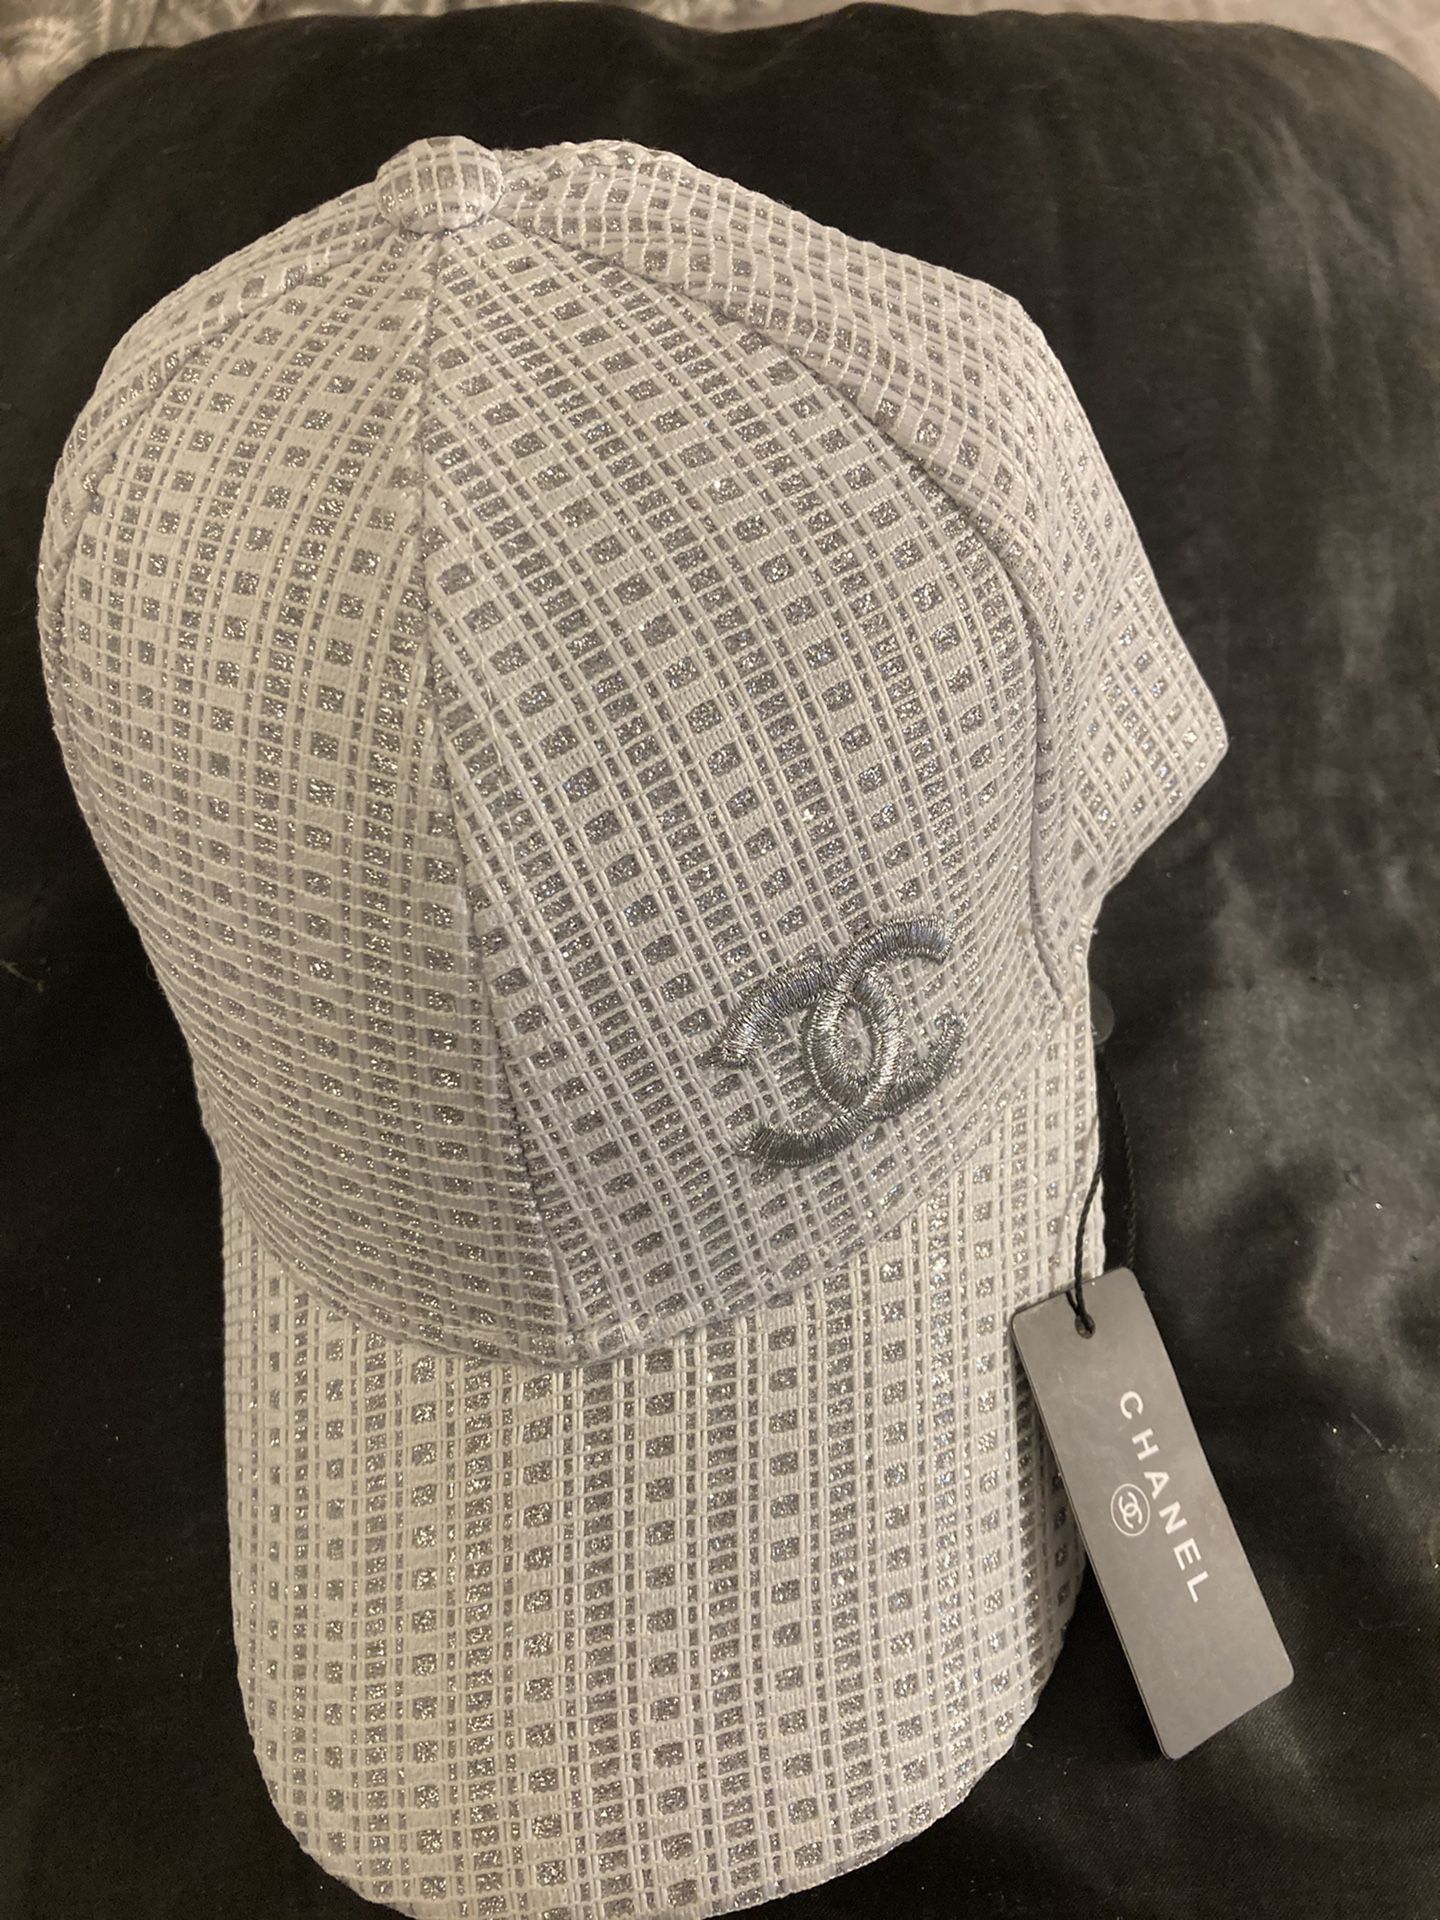 Nwt! Women's Adjustable Chanel Baseball Hat. BagWhite Accented